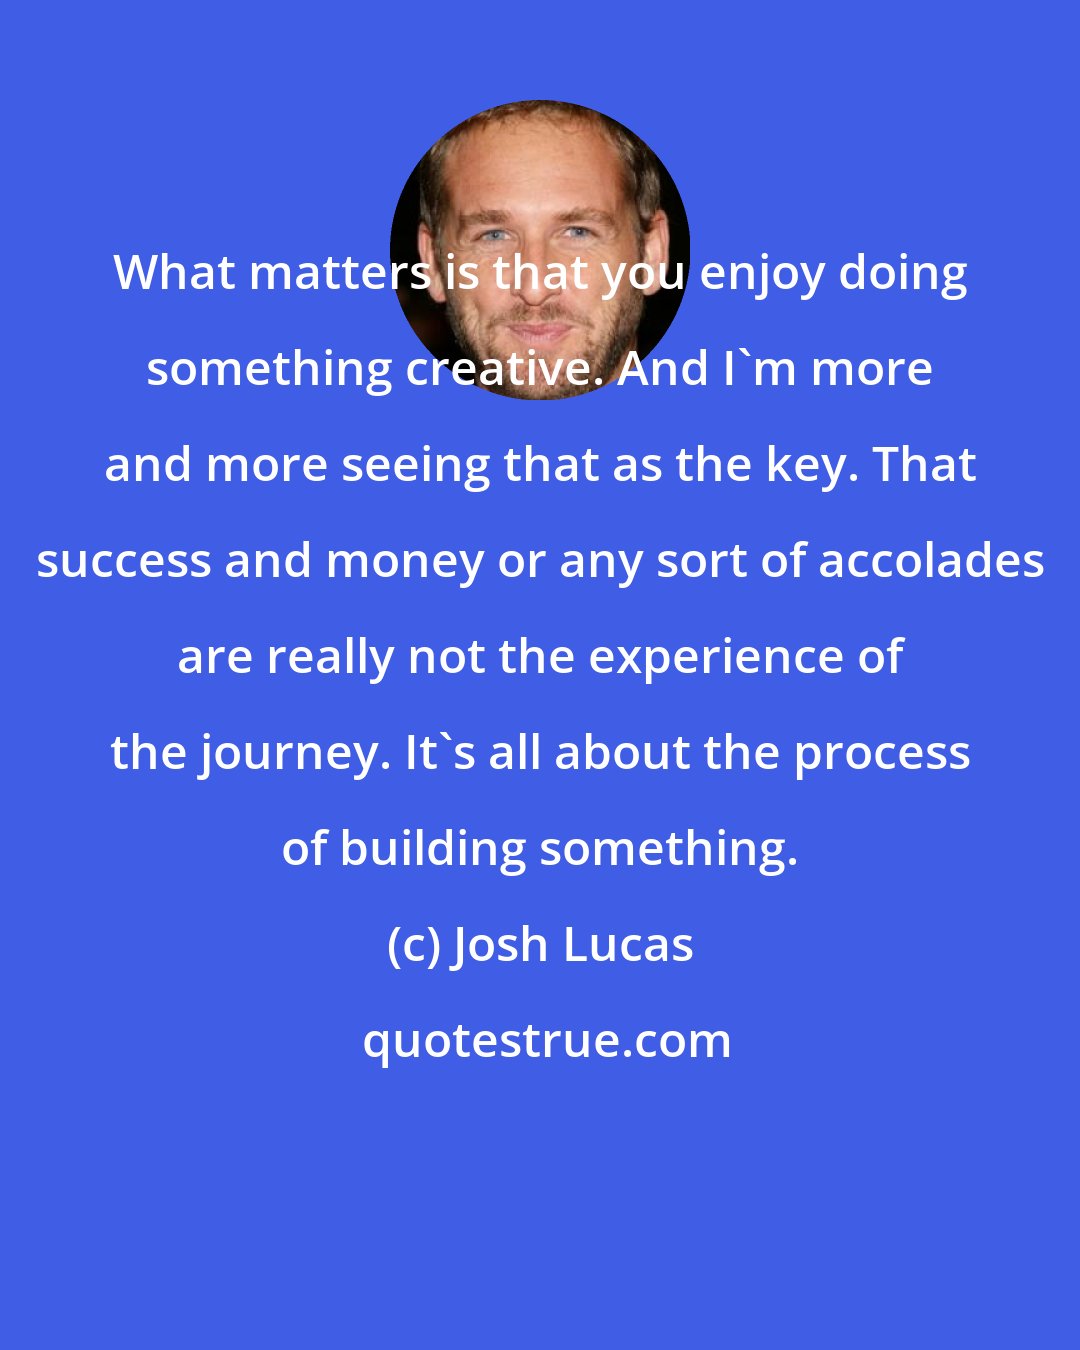 Josh Lucas: What matters is that you enjoy doing something creative. And I'm more and more seeing that as the key. That success and money or any sort of accolades are really not the experience of the journey. It's all about the process of building something.